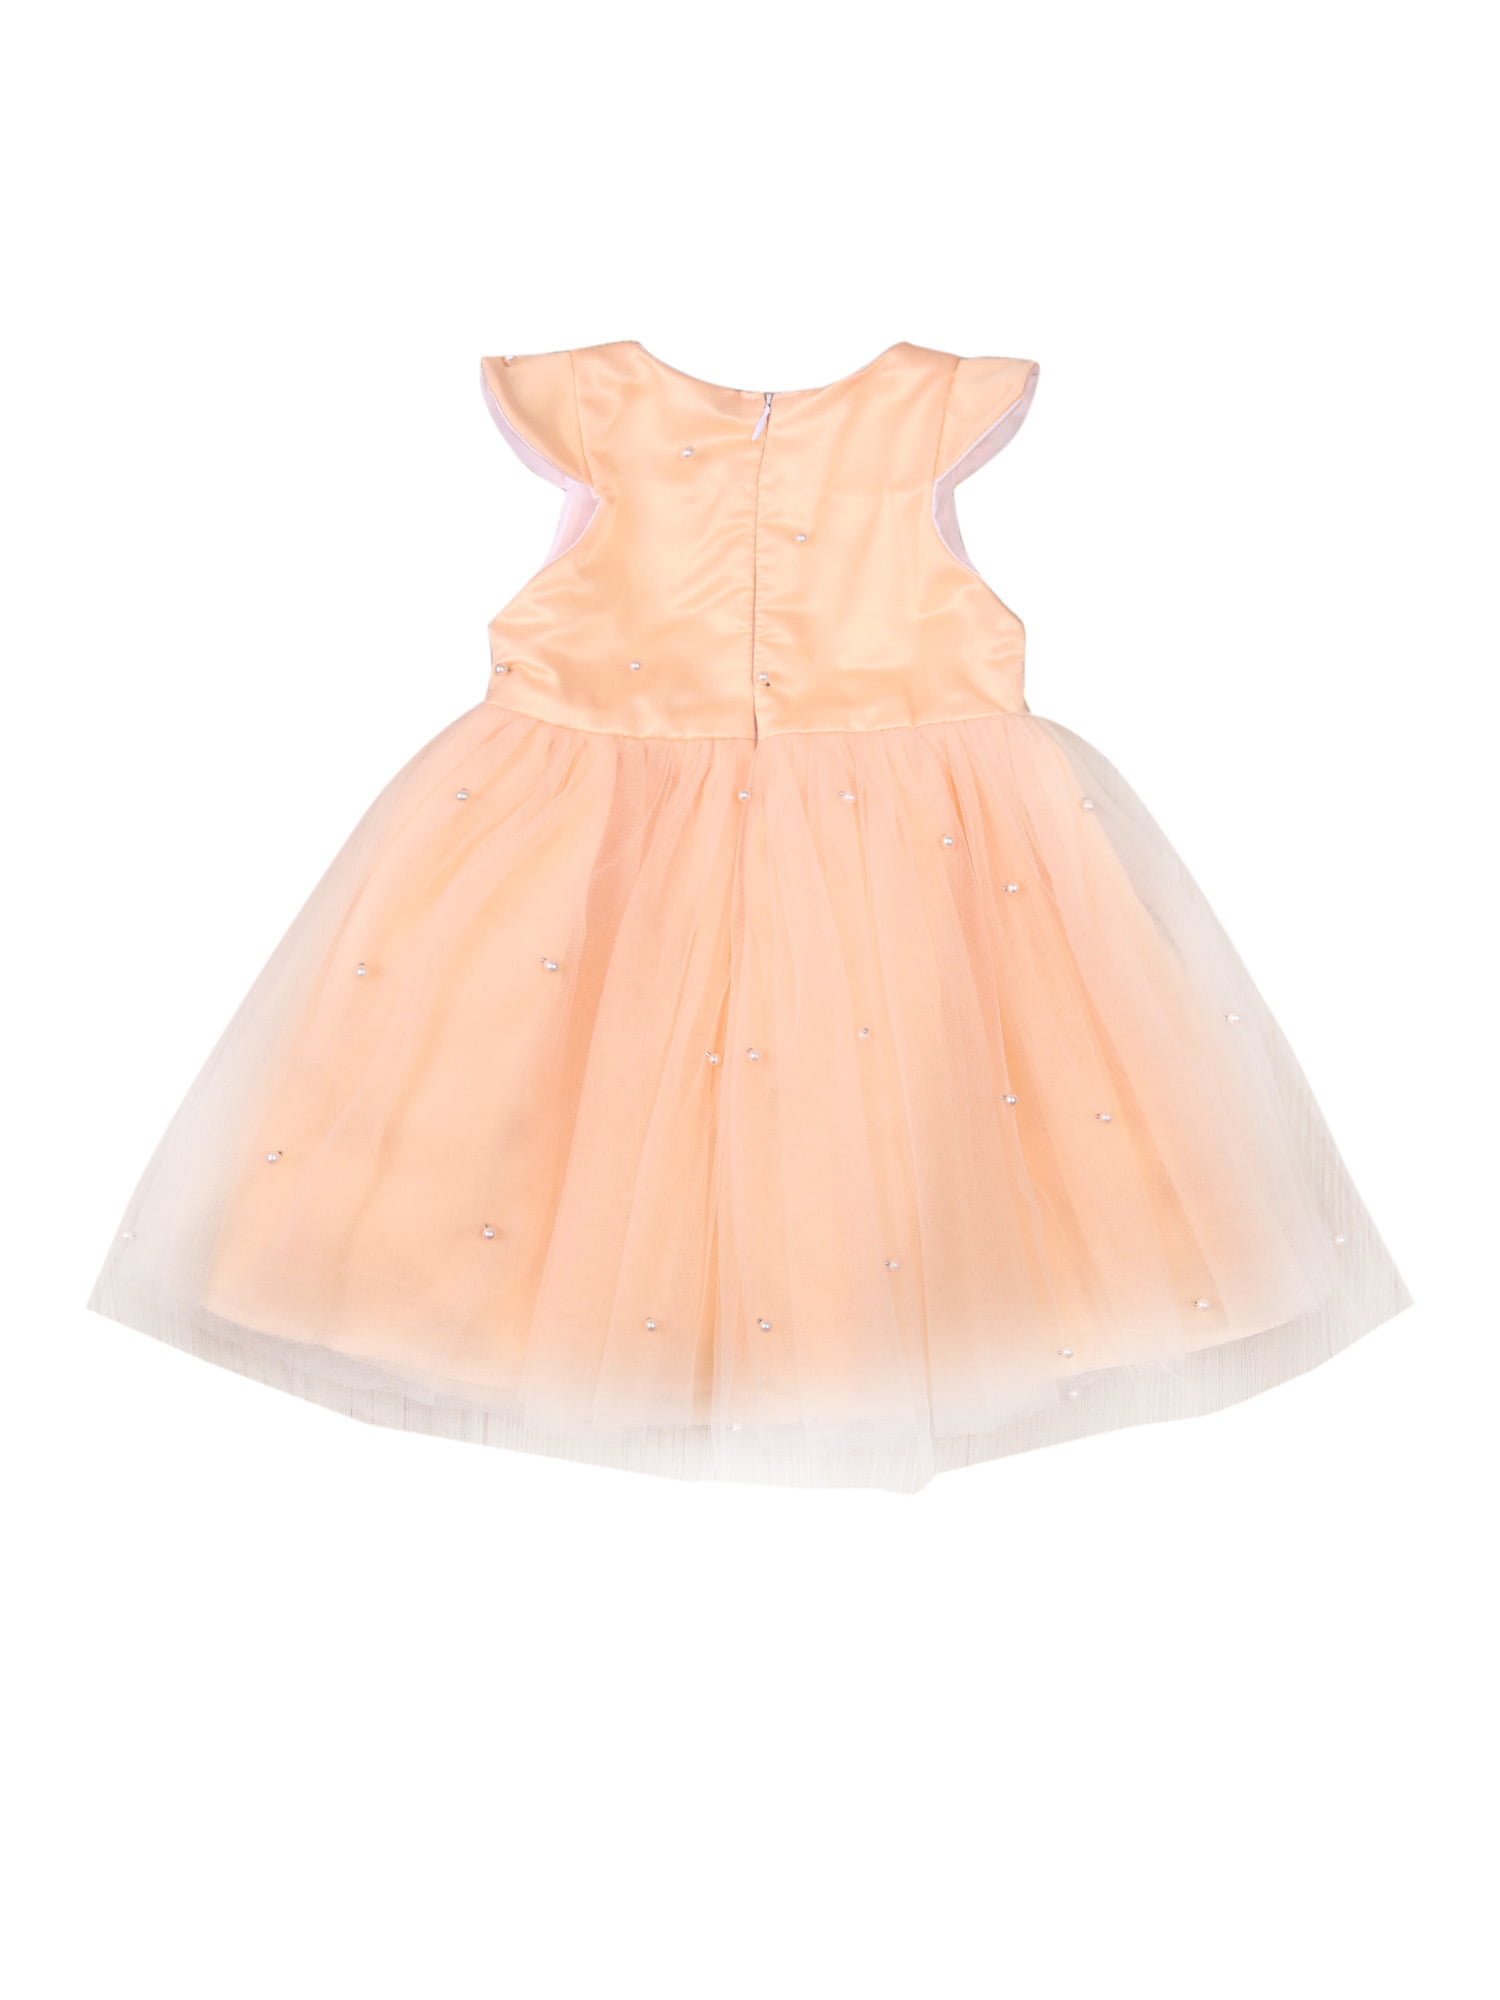 Lively Newborn Baby Girls Lovely Princess Party Dress Bowknot Party Tute Dress 